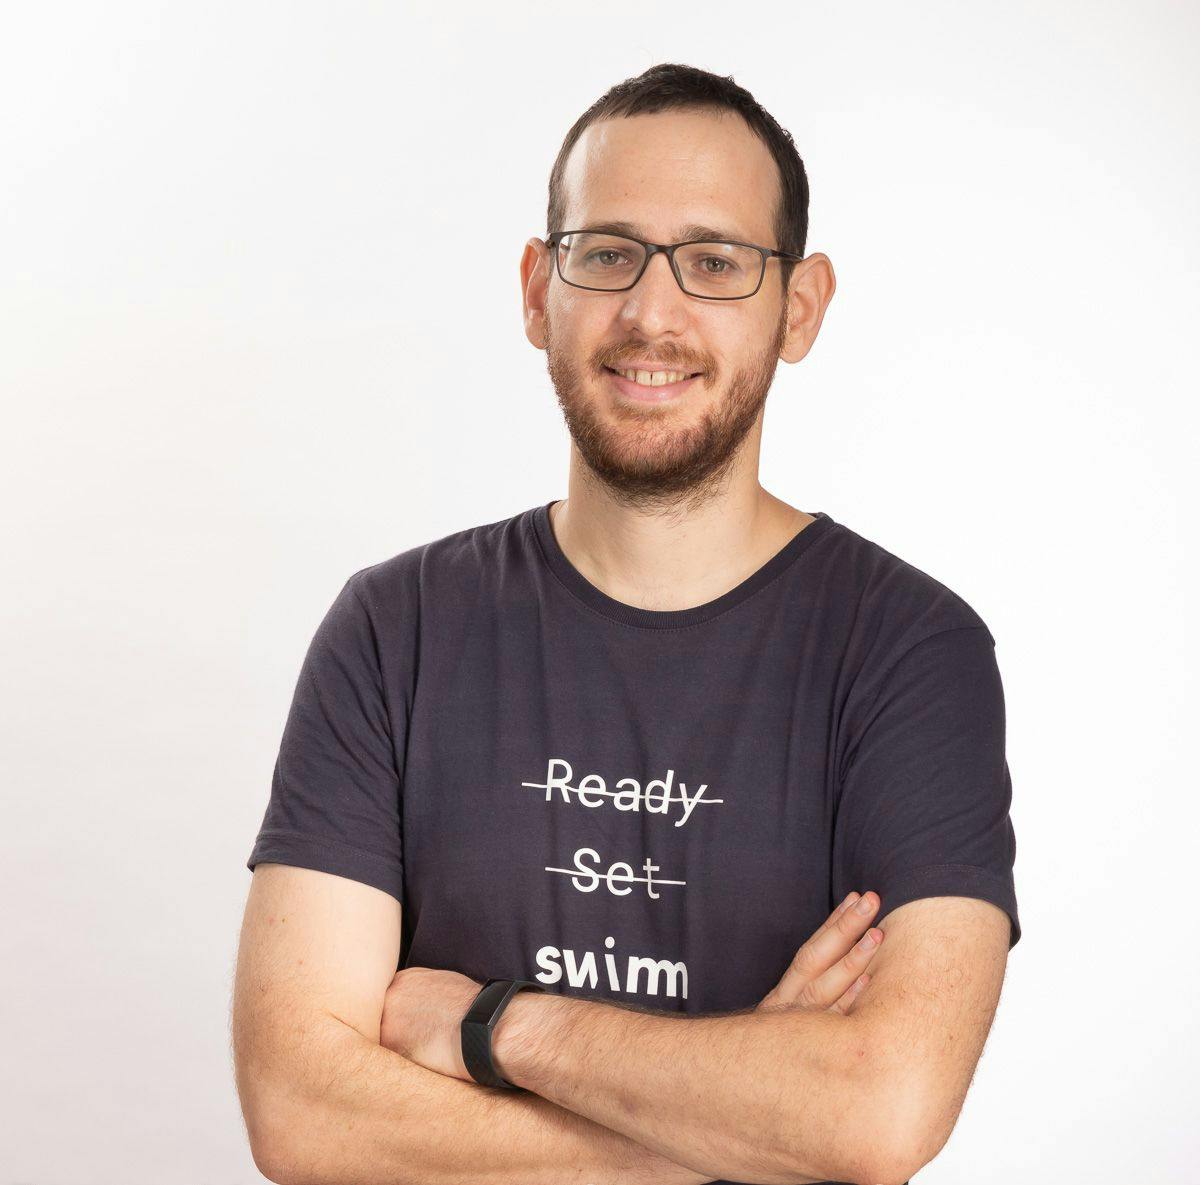 /meet-the-writer-hackernoon-contributor-omer-rosenbaum-cto-and-co-founder-at-swimmio feature image